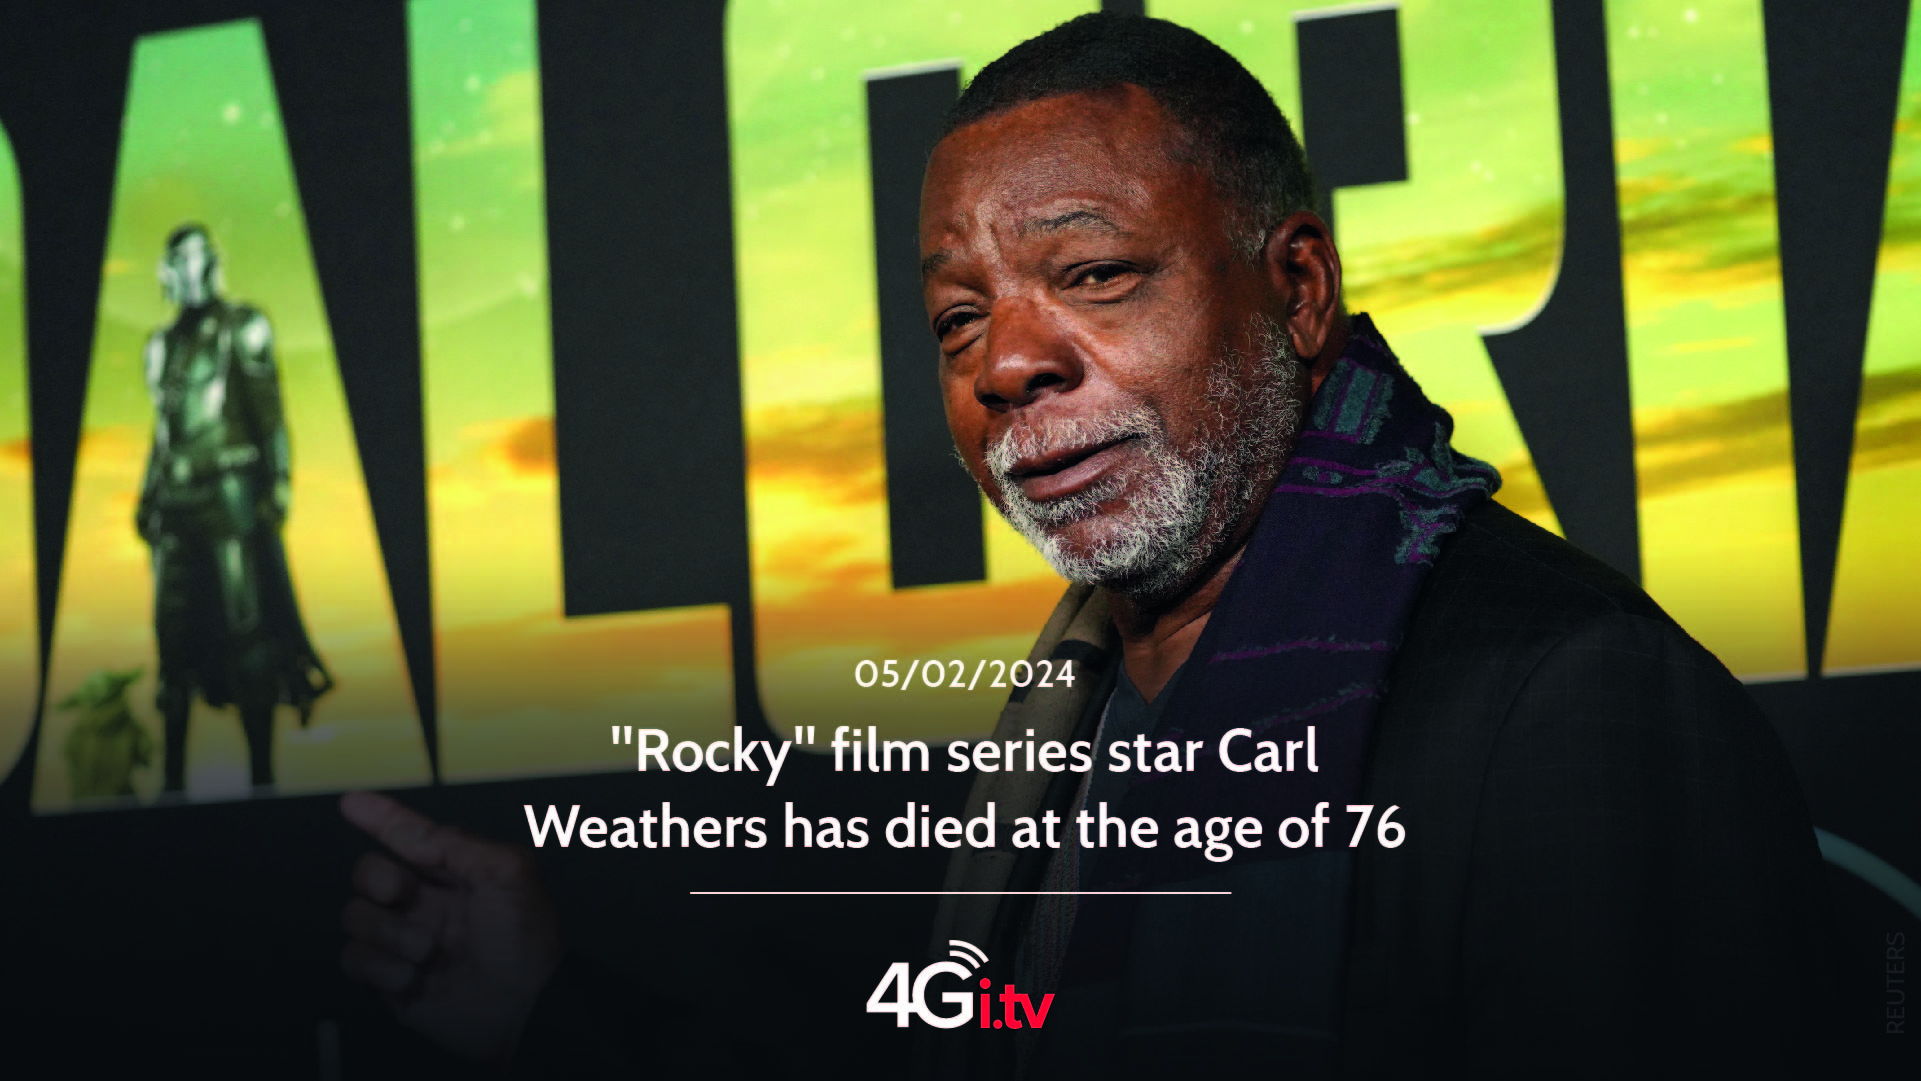 Подробнее о статье “Rocky” film series star Carl Weathers has died at the age of 76